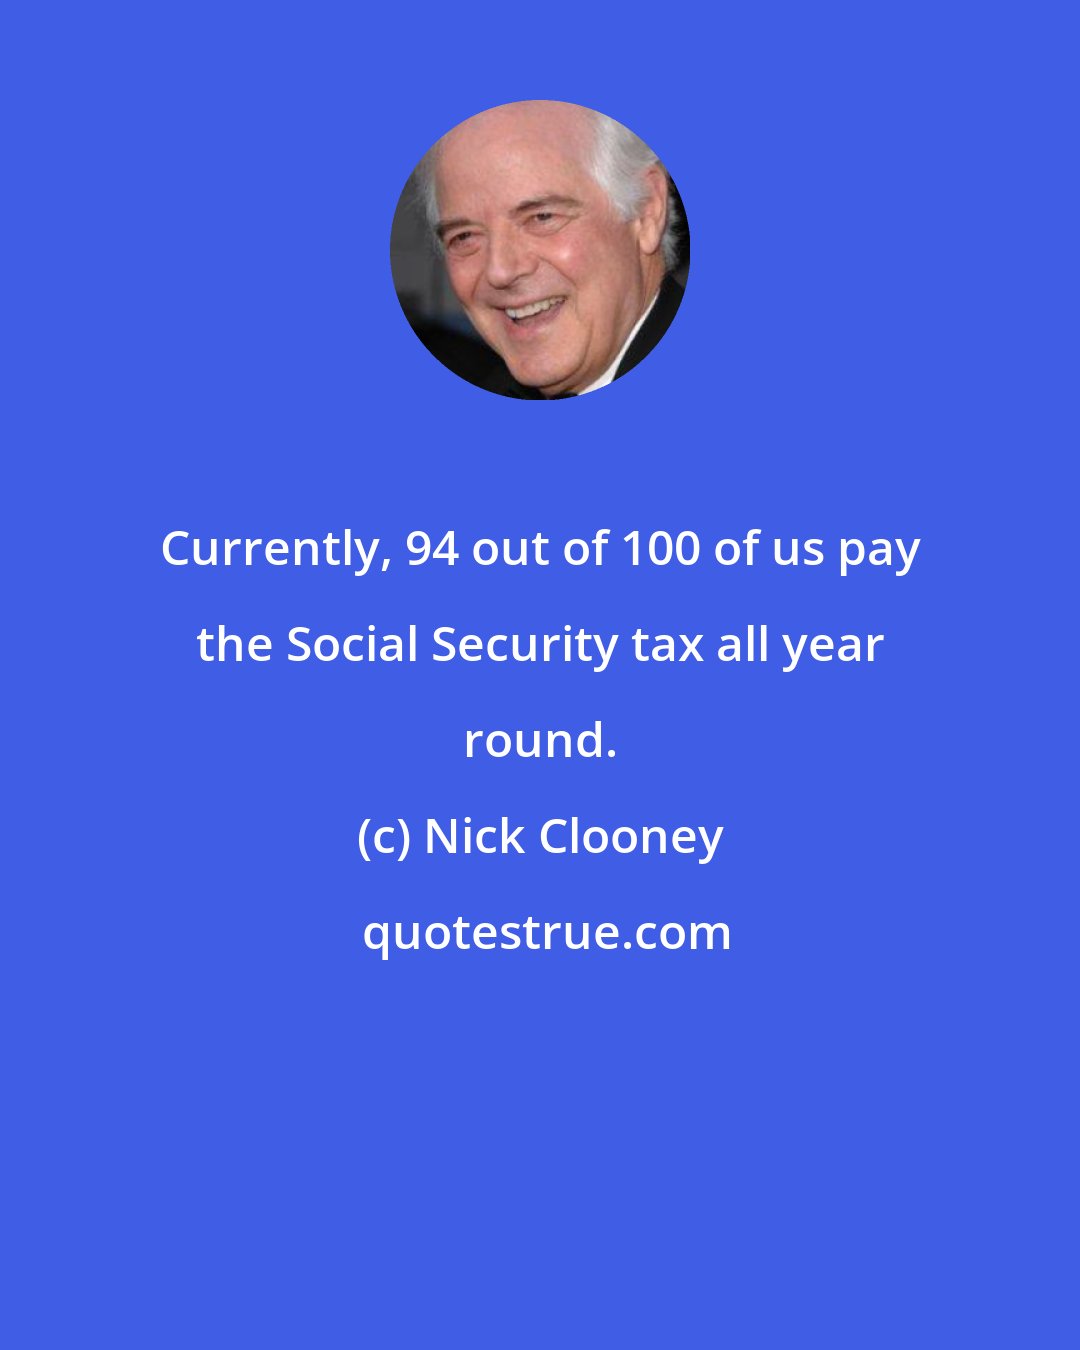 Nick Clooney: Currently, 94 out of 100 of us pay the Social Security tax all year round.